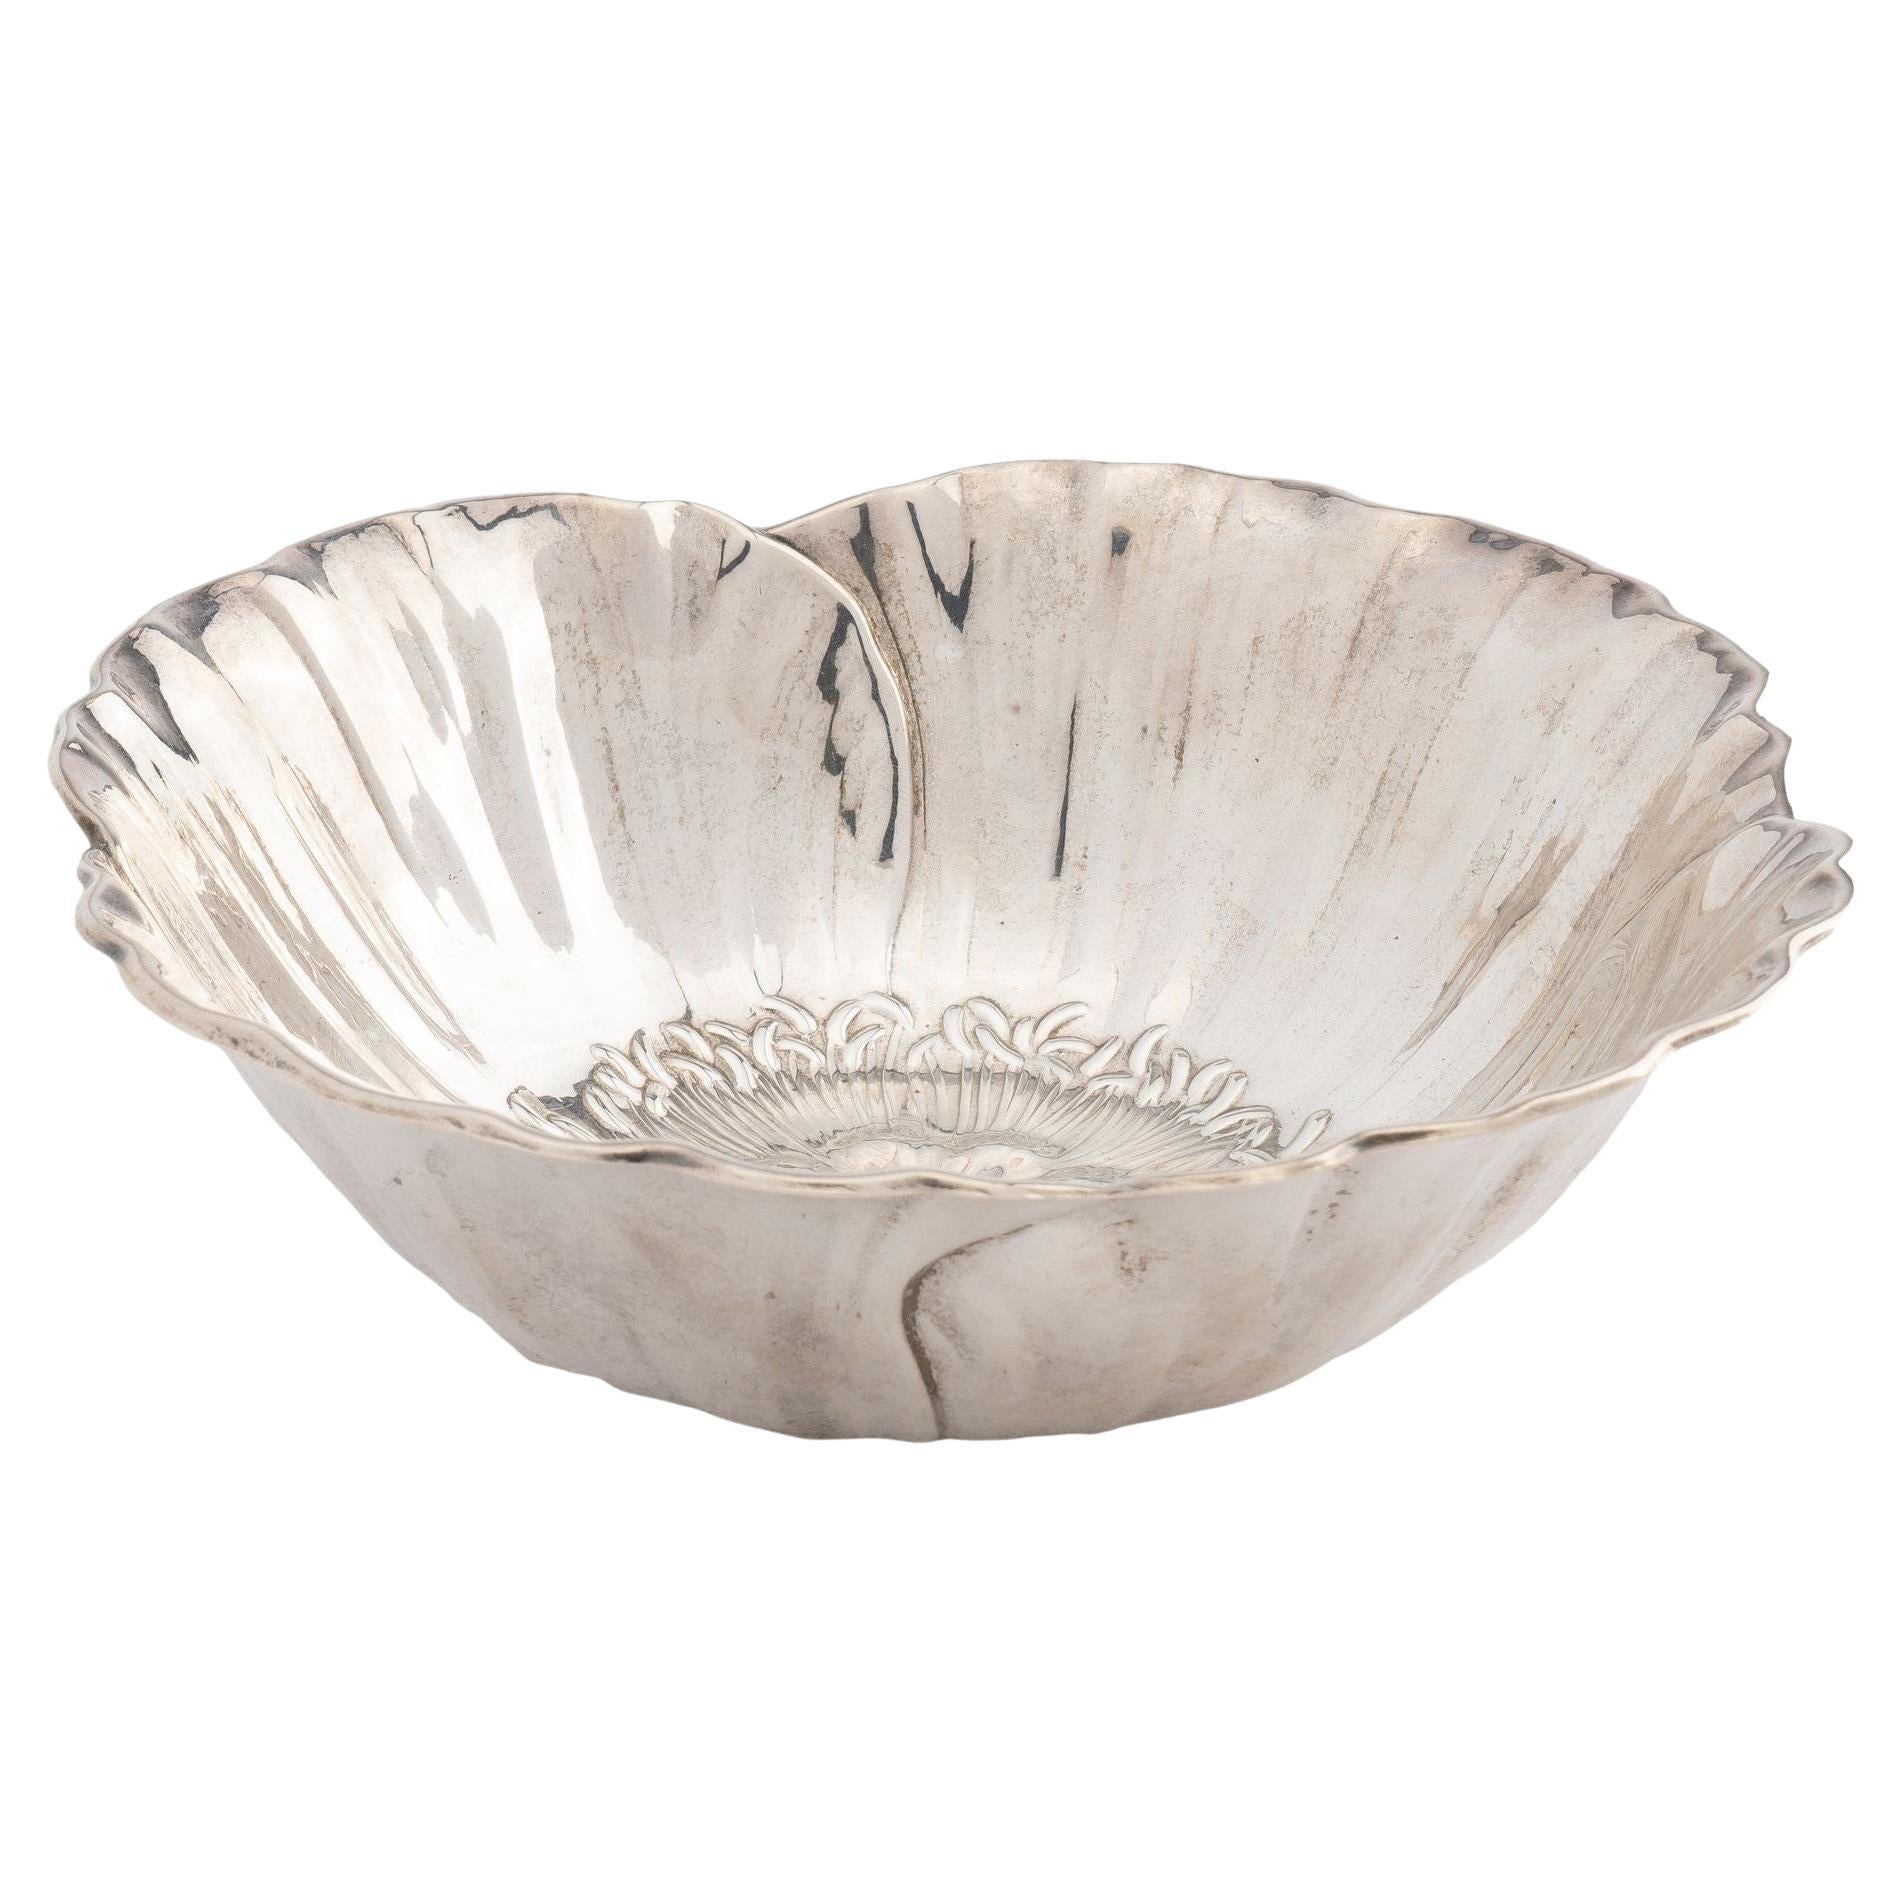 Hand-Hammered Sterling Silver Bowl by Meriden Britannia Co '1893'